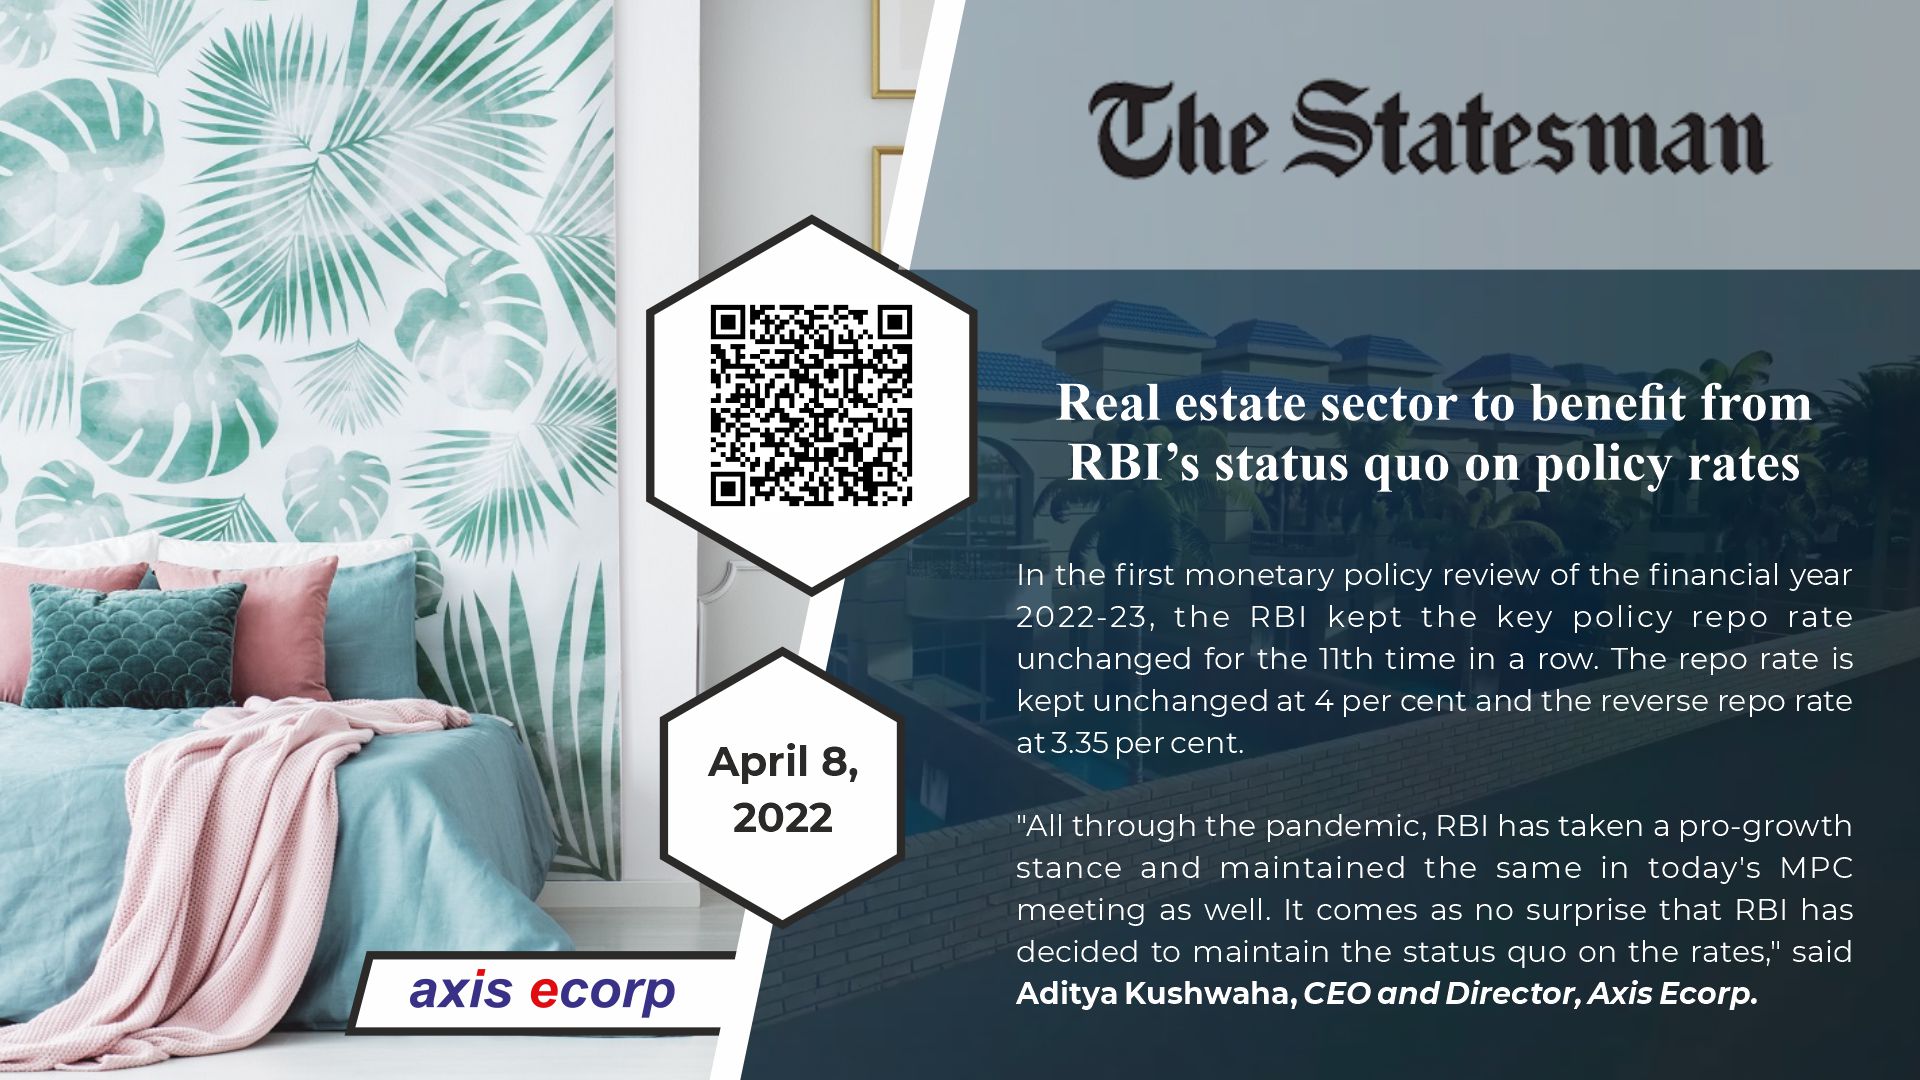 Real estate sector to benefit from RBI's status quo on policy rates